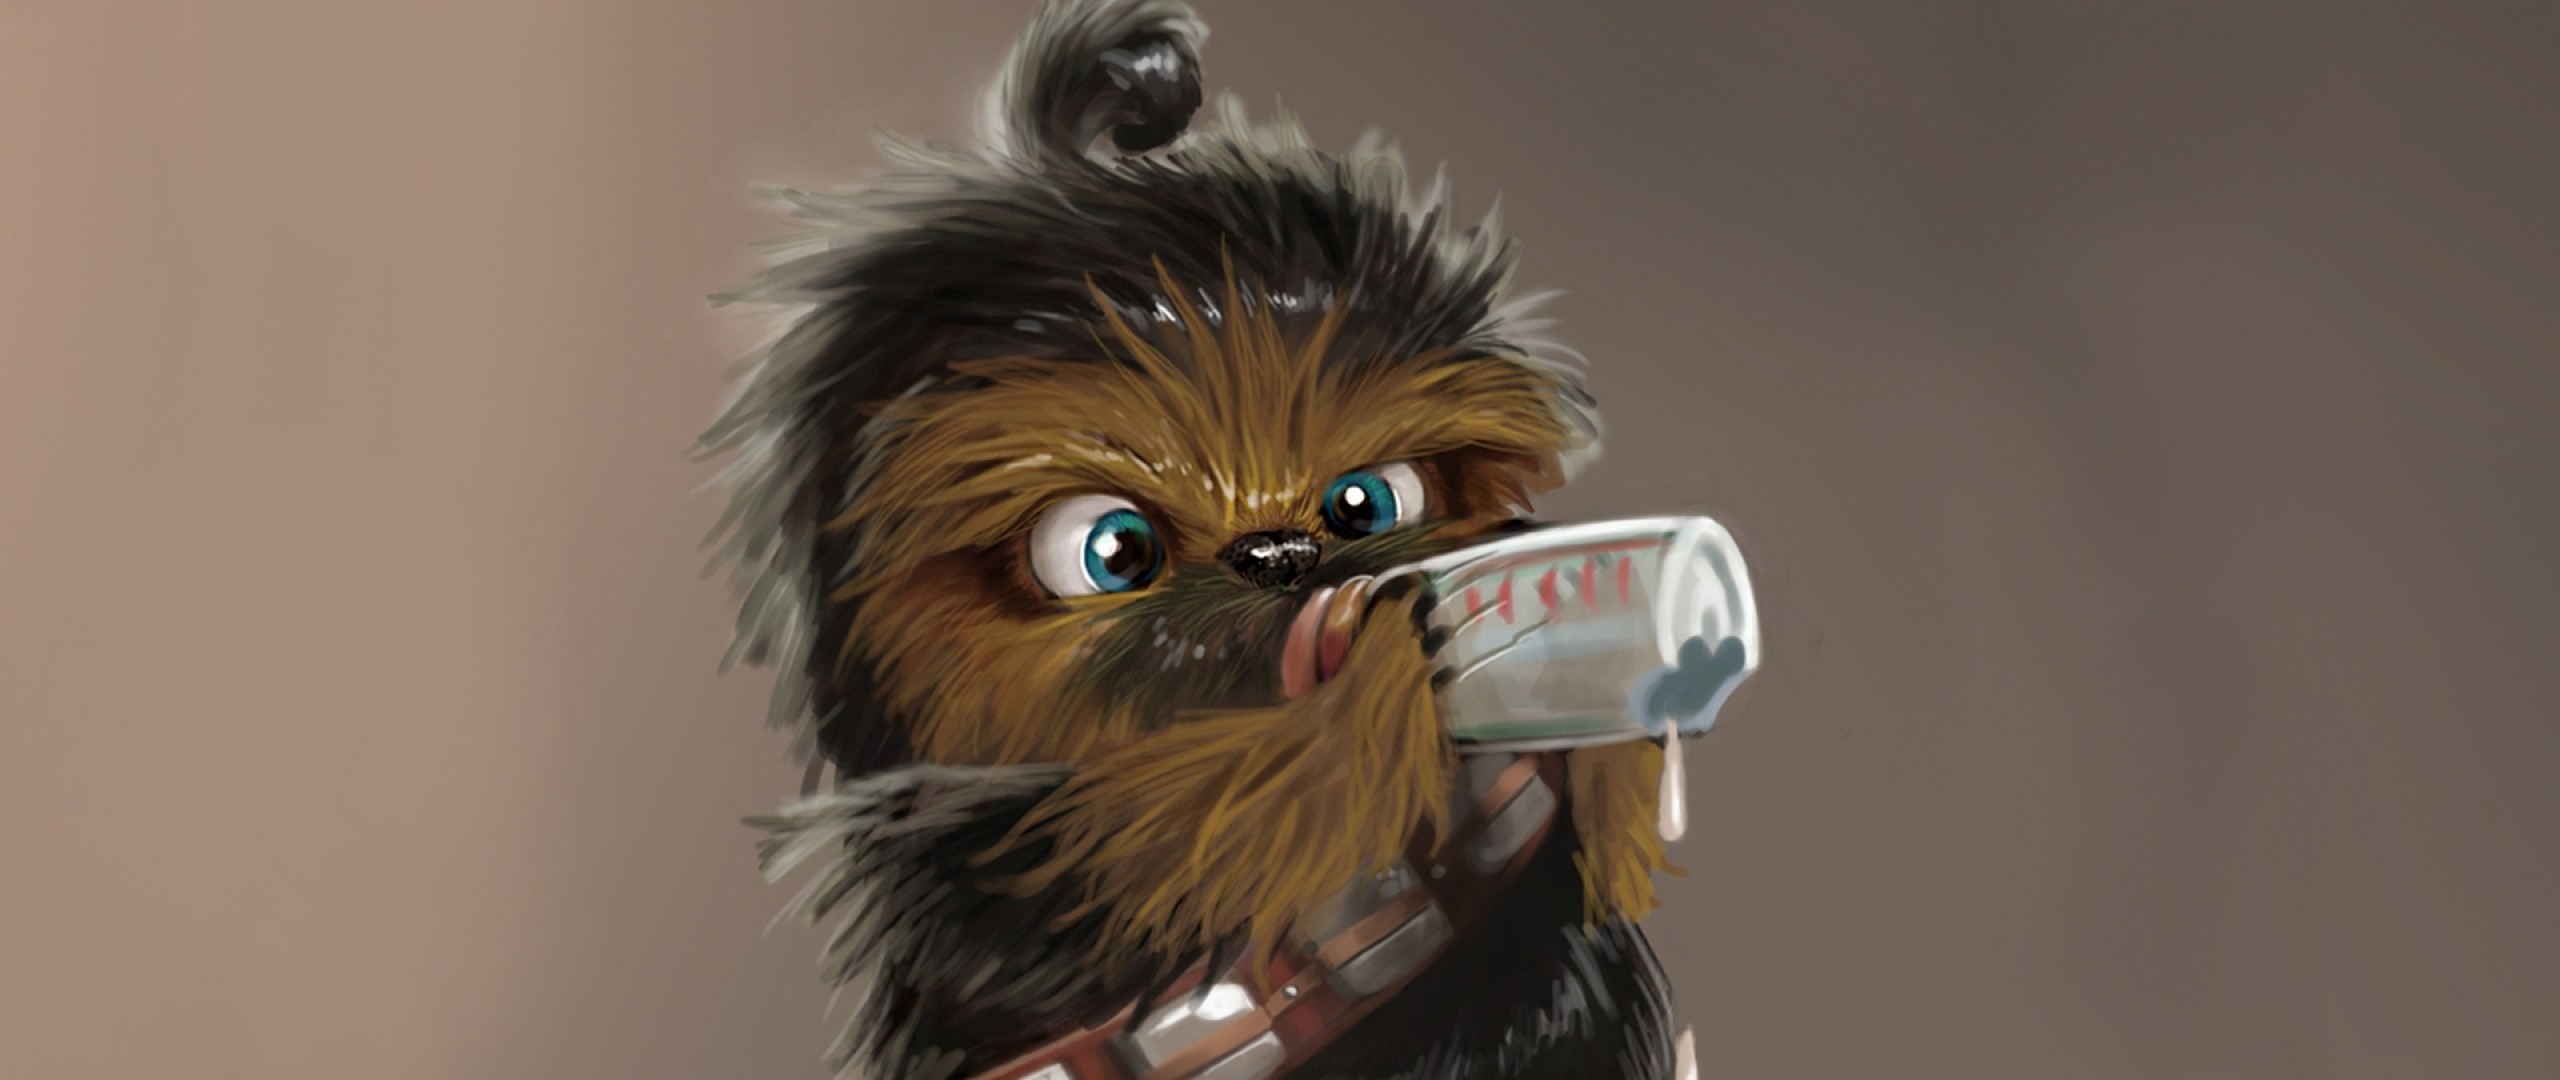 2560x1080 Preview wallpaper star wars, chewbacca, drink, baby 